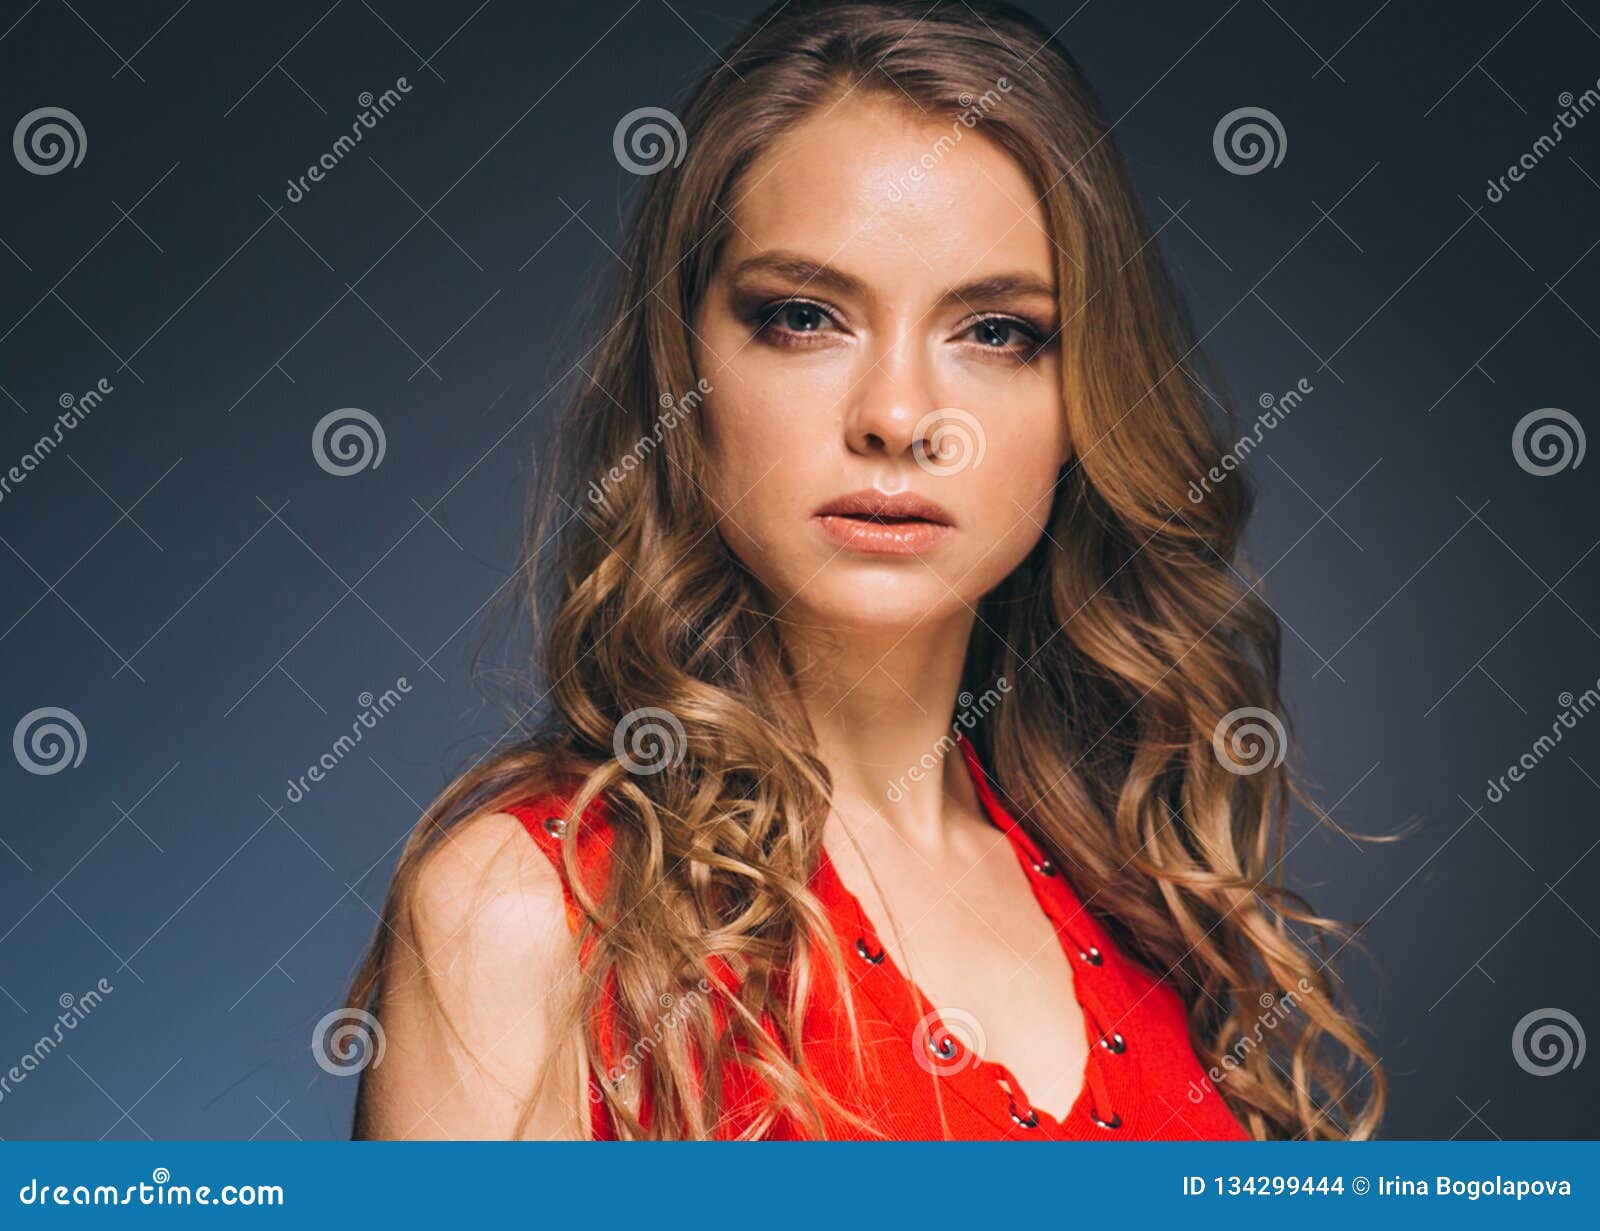 Woman in Red Dress with Long Blonde Hair Stock Photo - Image of hair ...